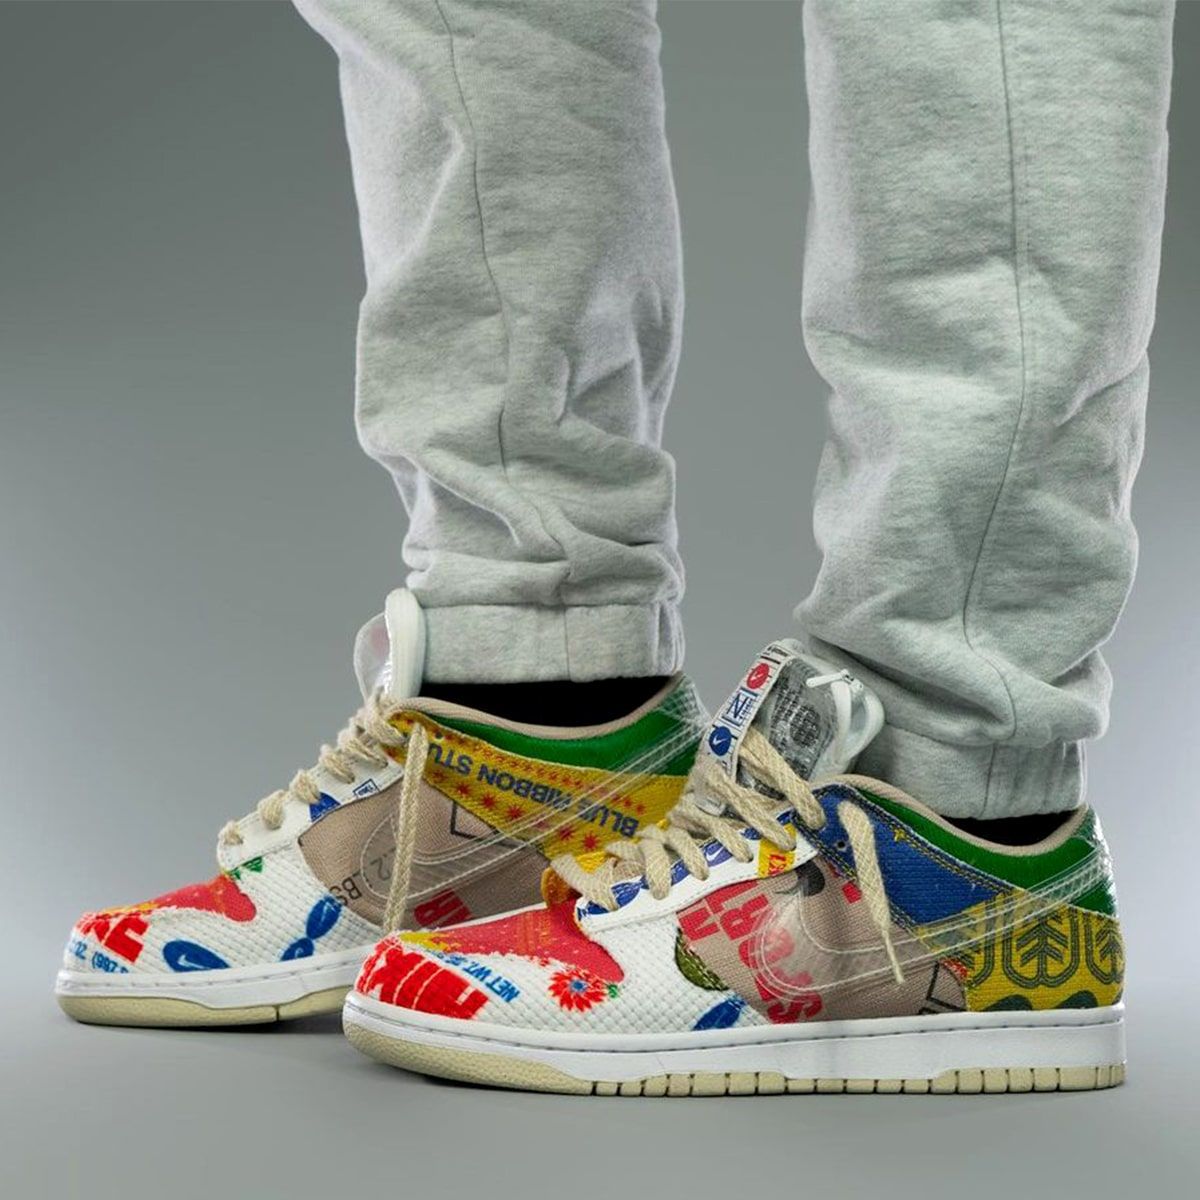 Where to Buy the Nike Dunk Low “City Market” | HOUSE OF HEAT